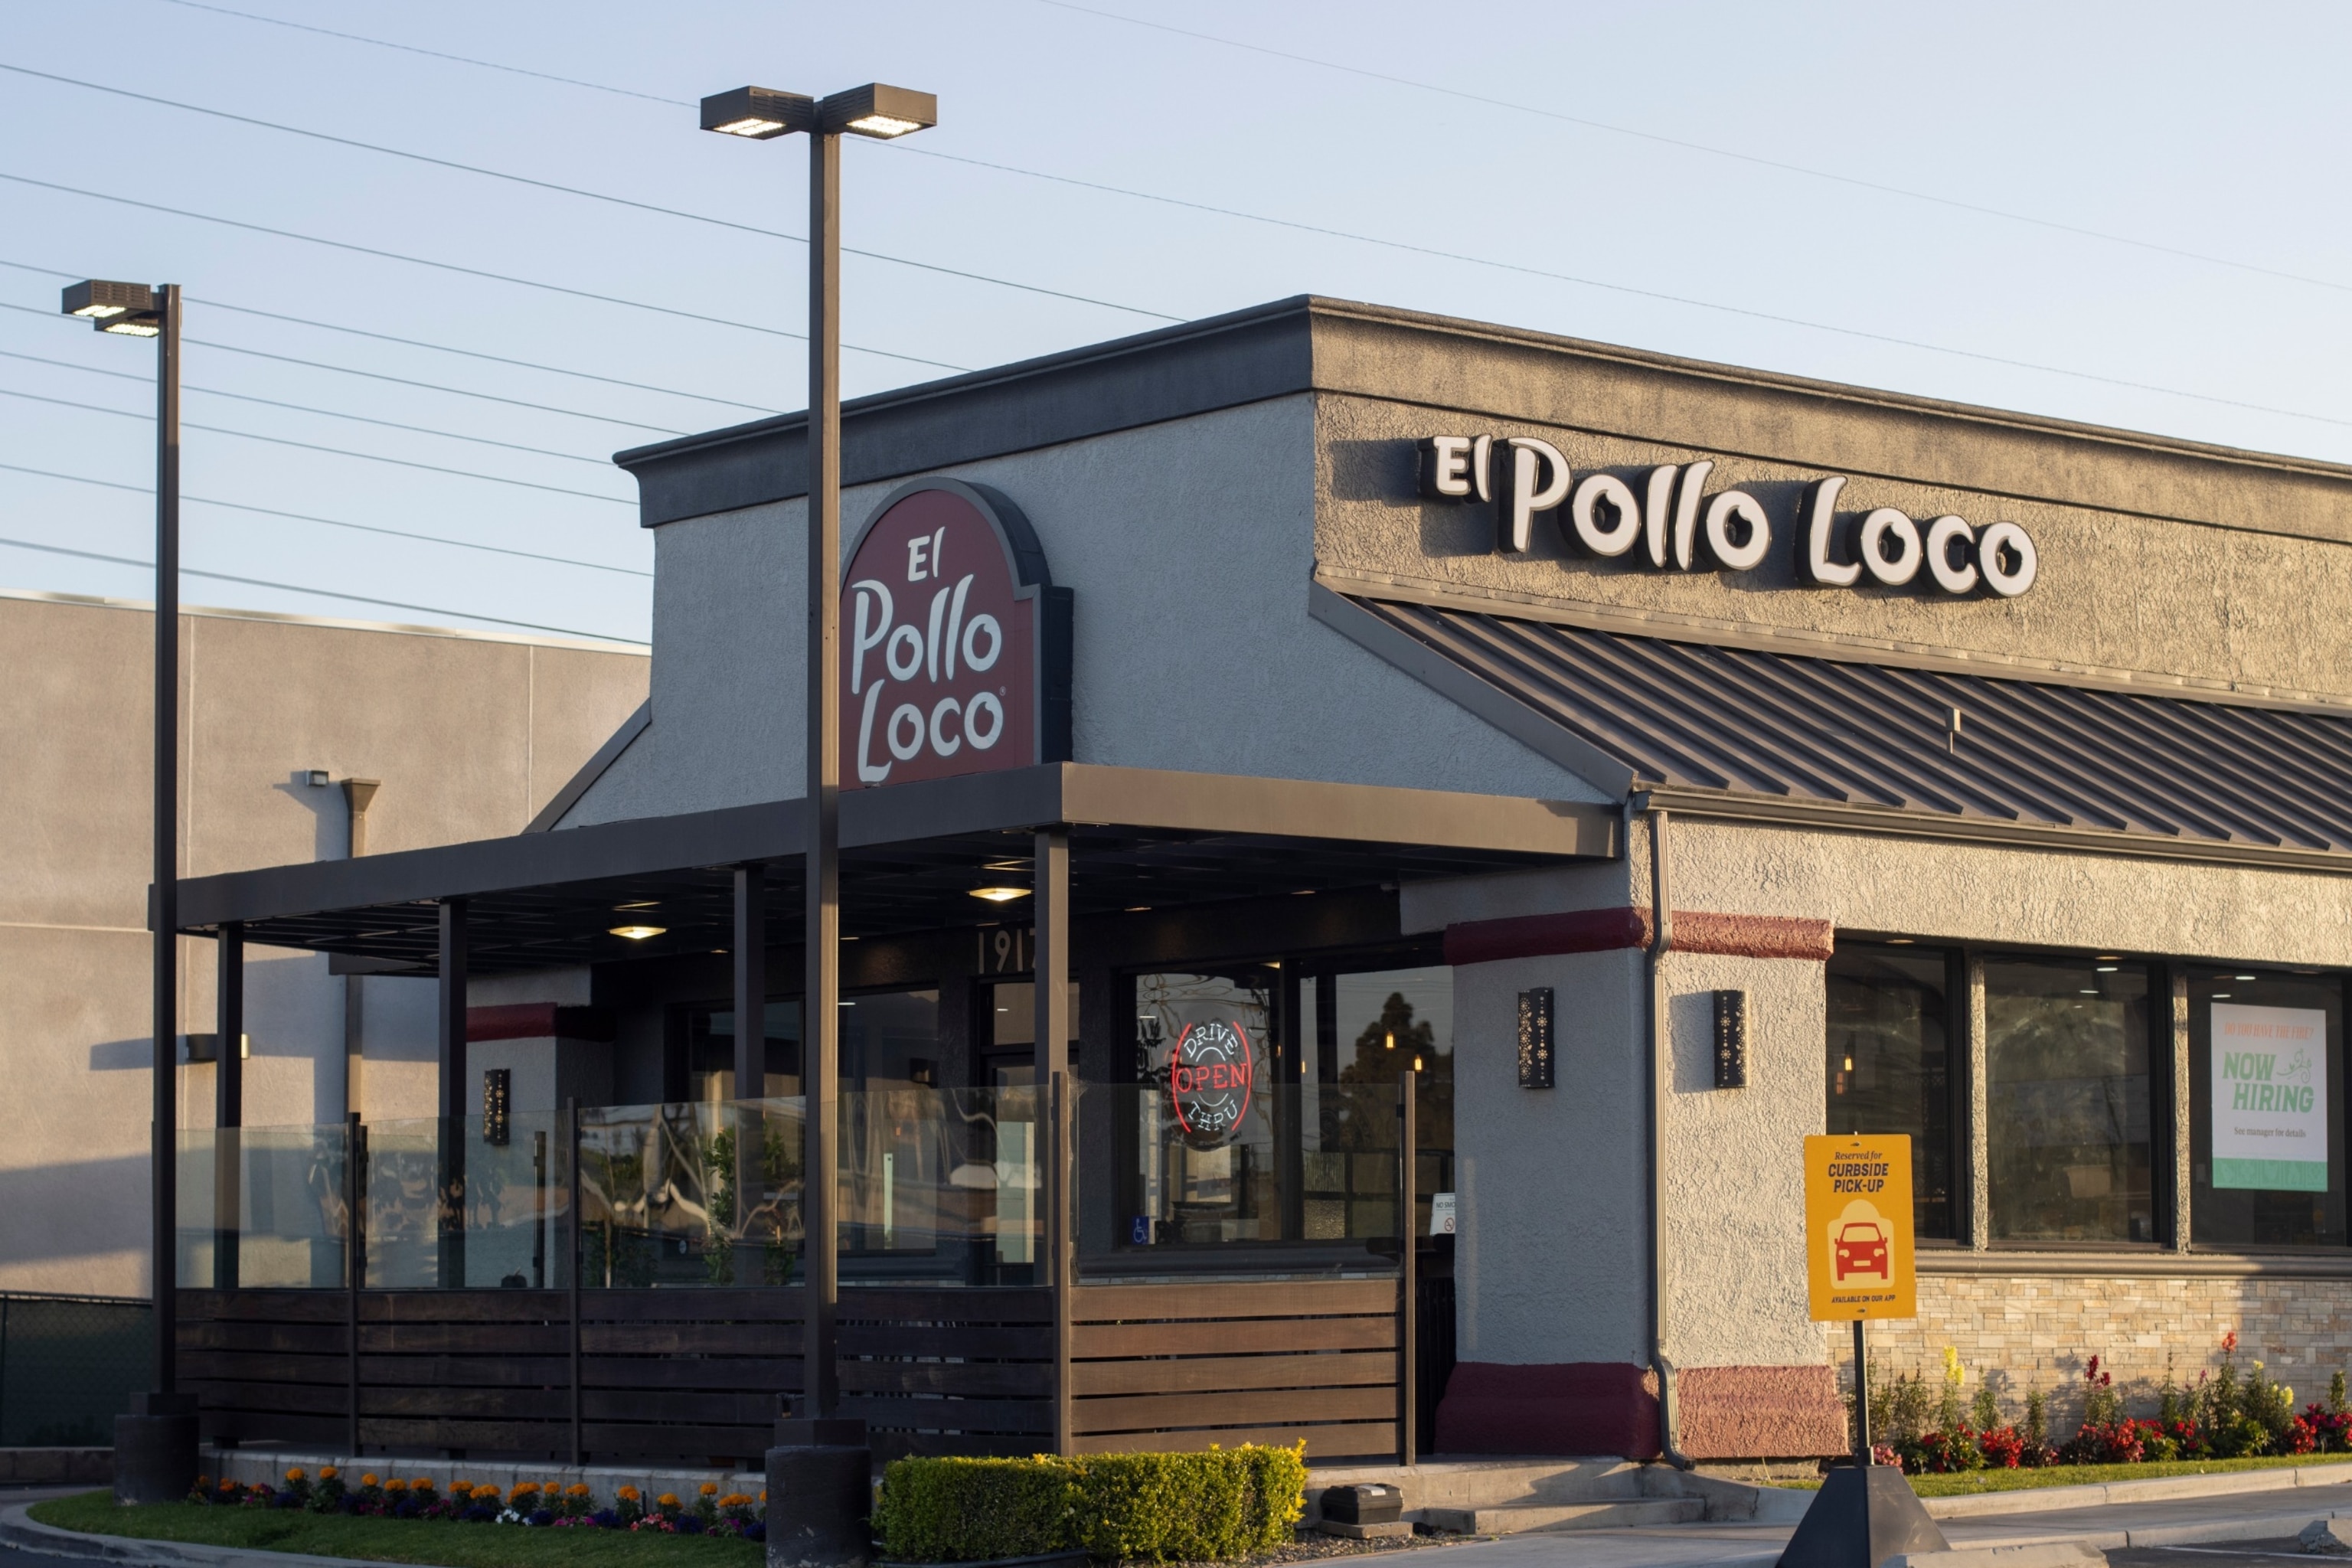 PHOTO: Exterior view of an El Pollo Loco restaurant in Huntington Beach, Calif., at dusk, on May 8, 2022.